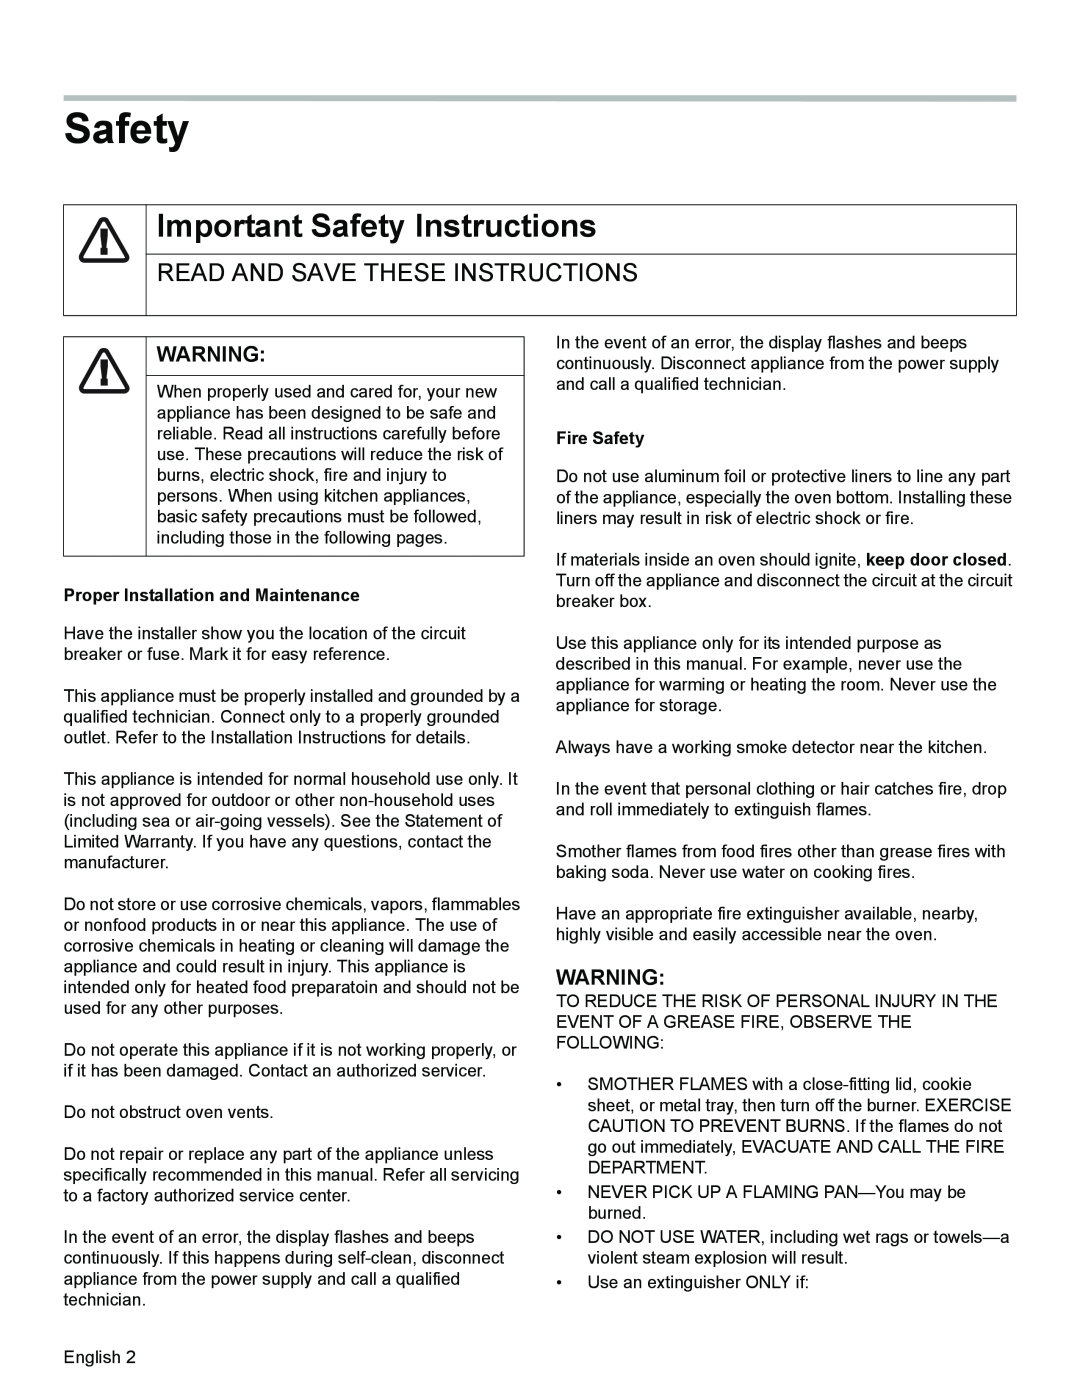 Thermador PODMW301, PODM301 manual Important Safety Instructions, Read And Save These Instructions, Fire Safety 